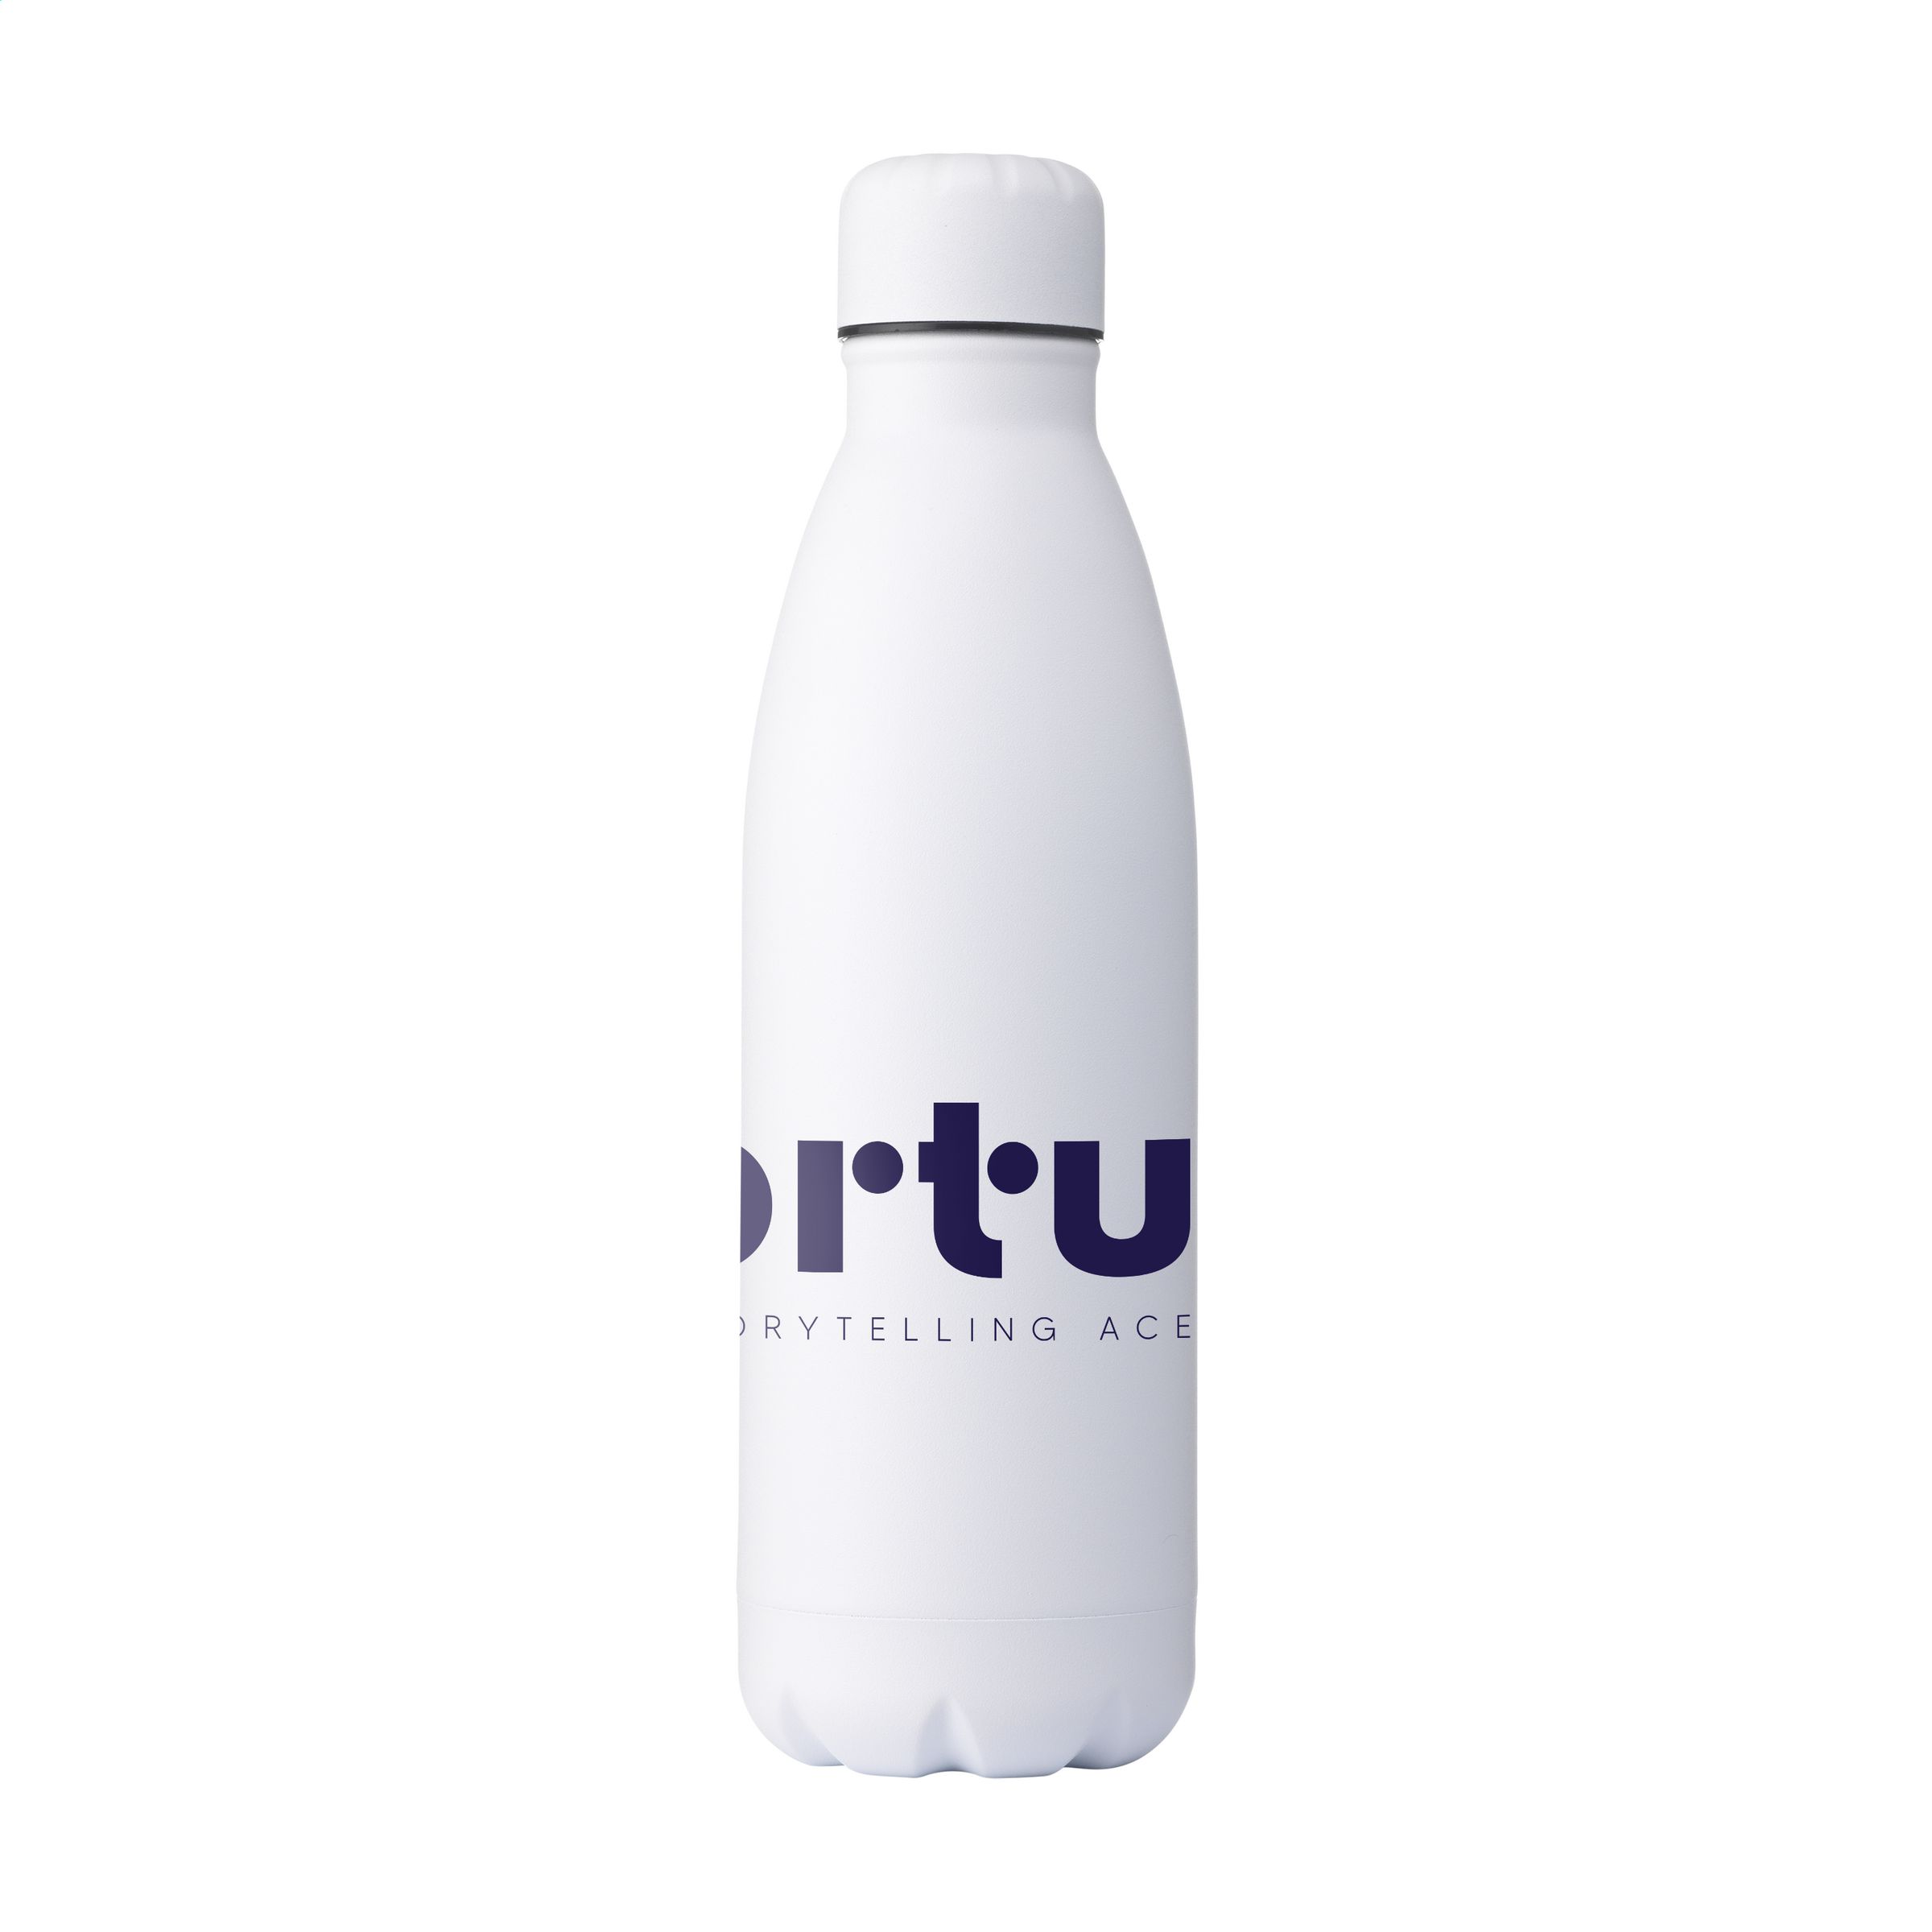 Water bottle made of recycled stainless steel, featuring double-wall construction for insulation and a leak-proof design for secure storage and transport. - Snodland